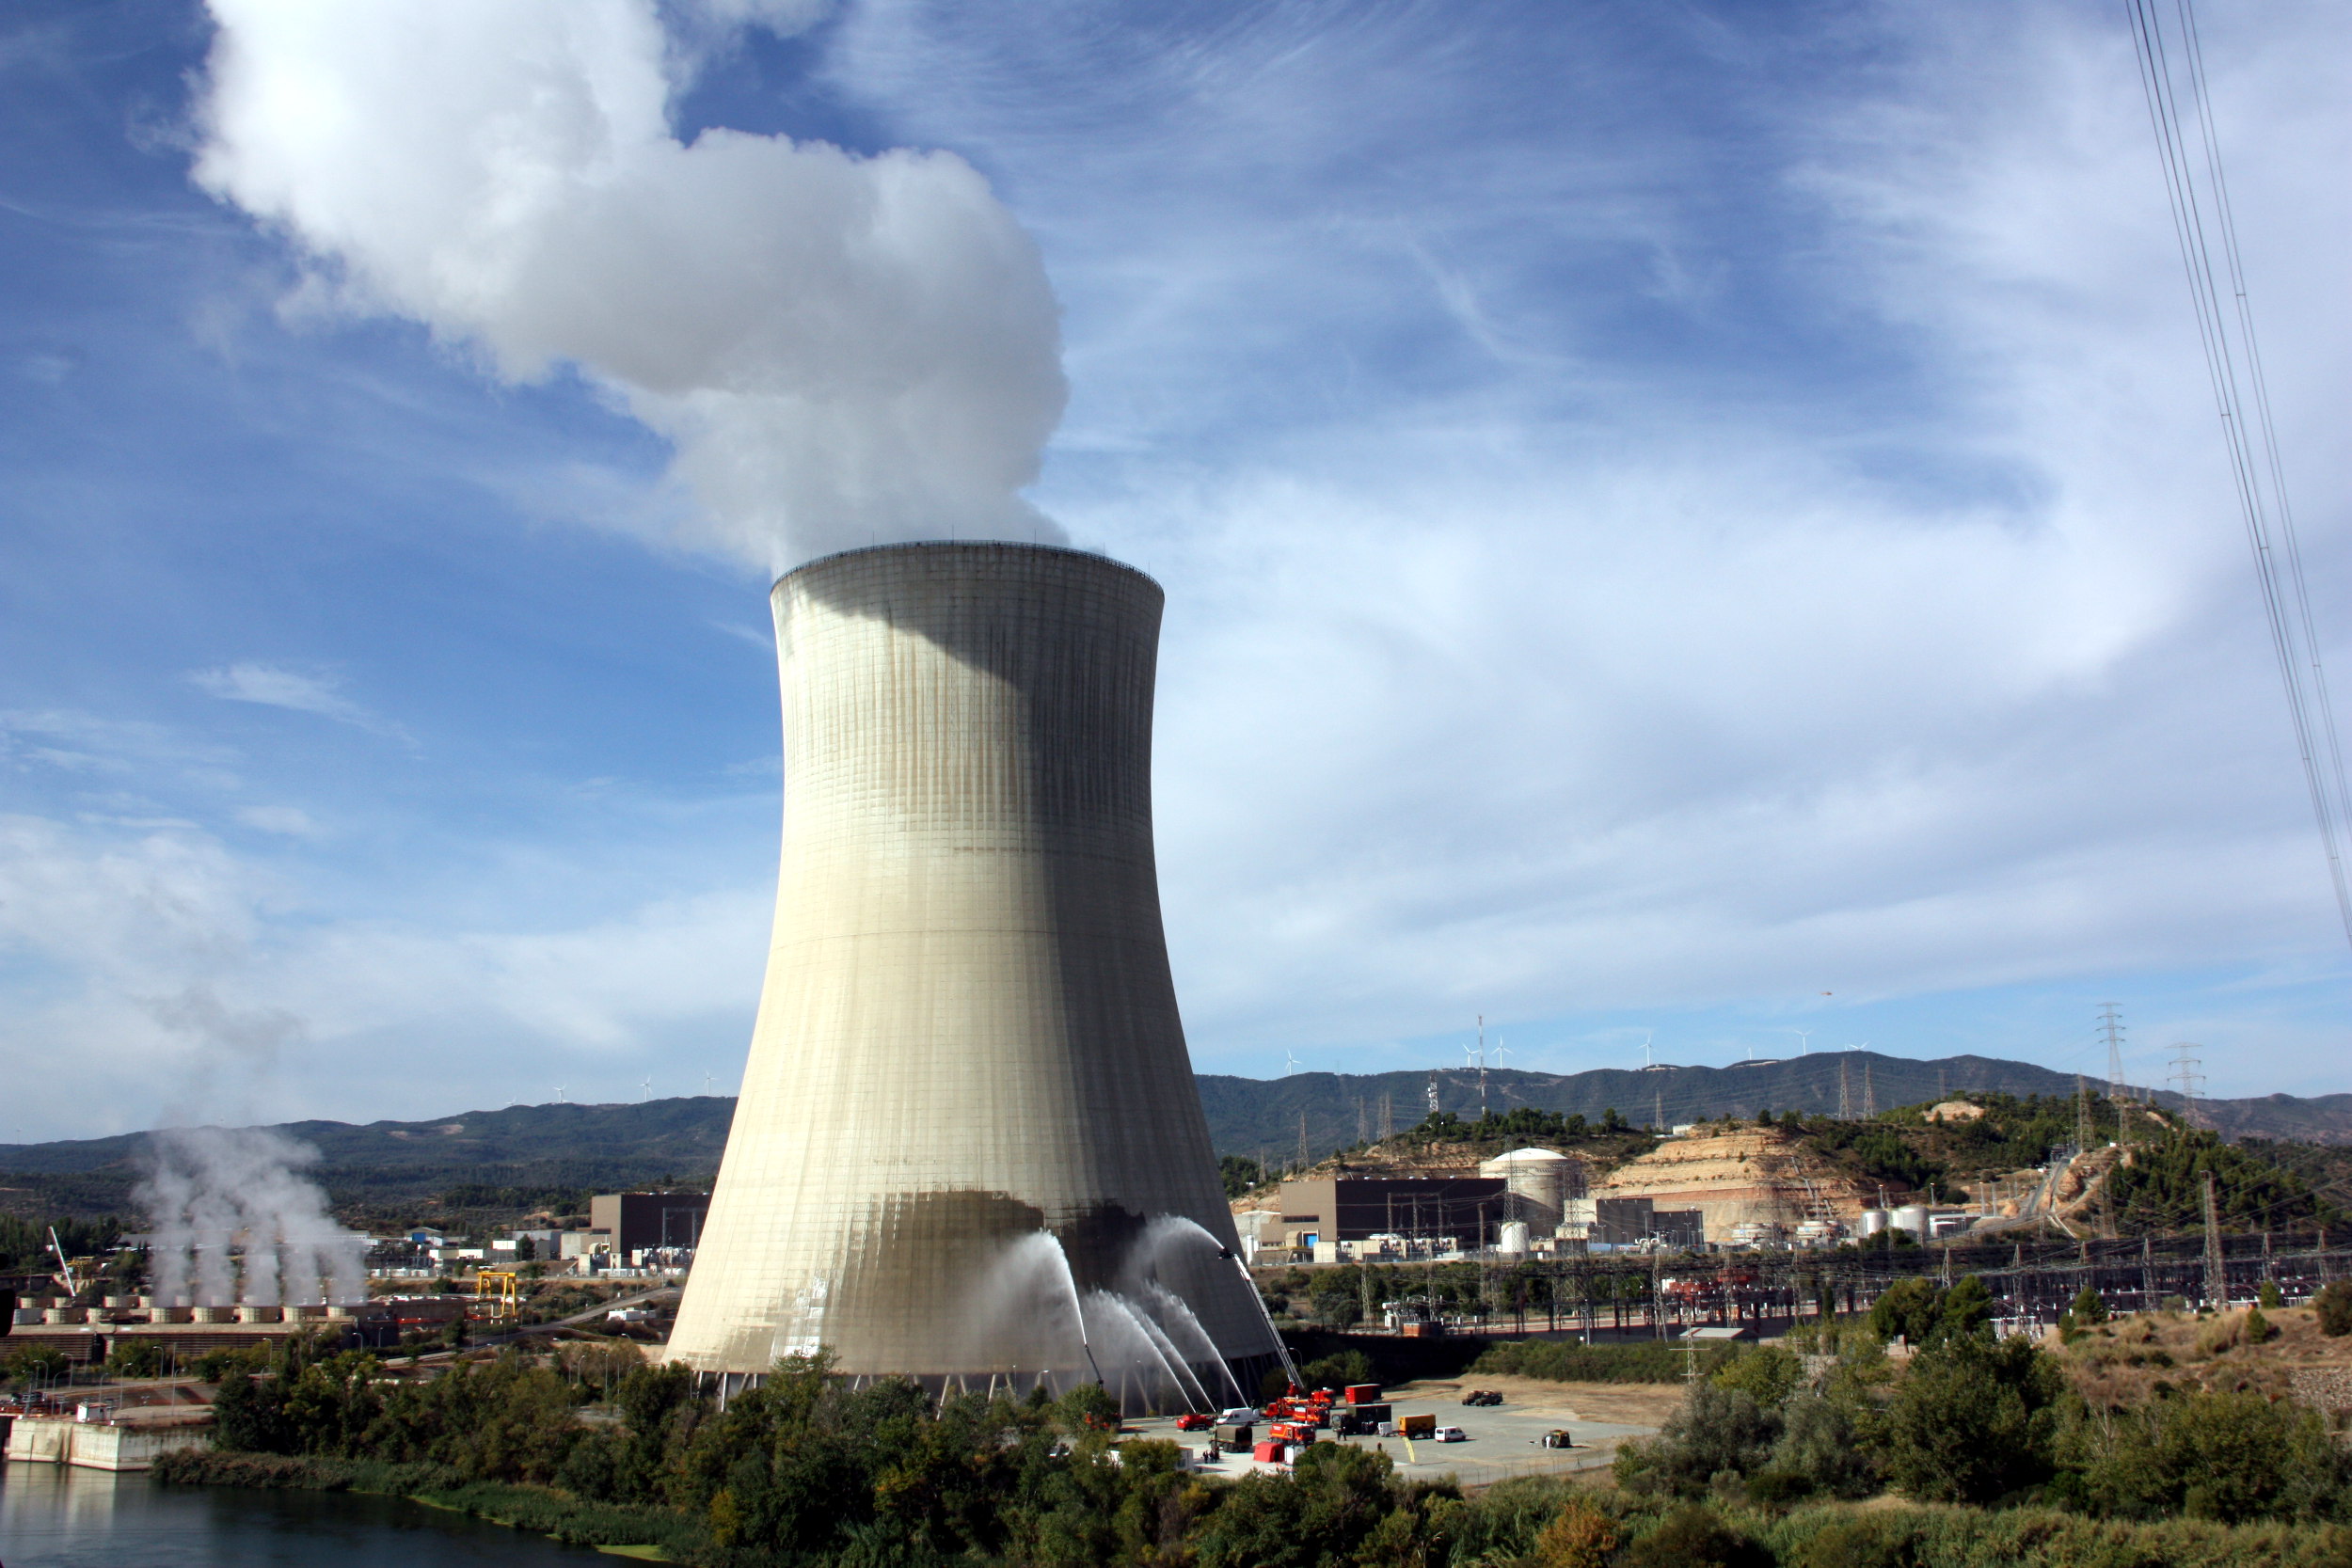 Image of a nuclear power station located in Ascó (by ACN)